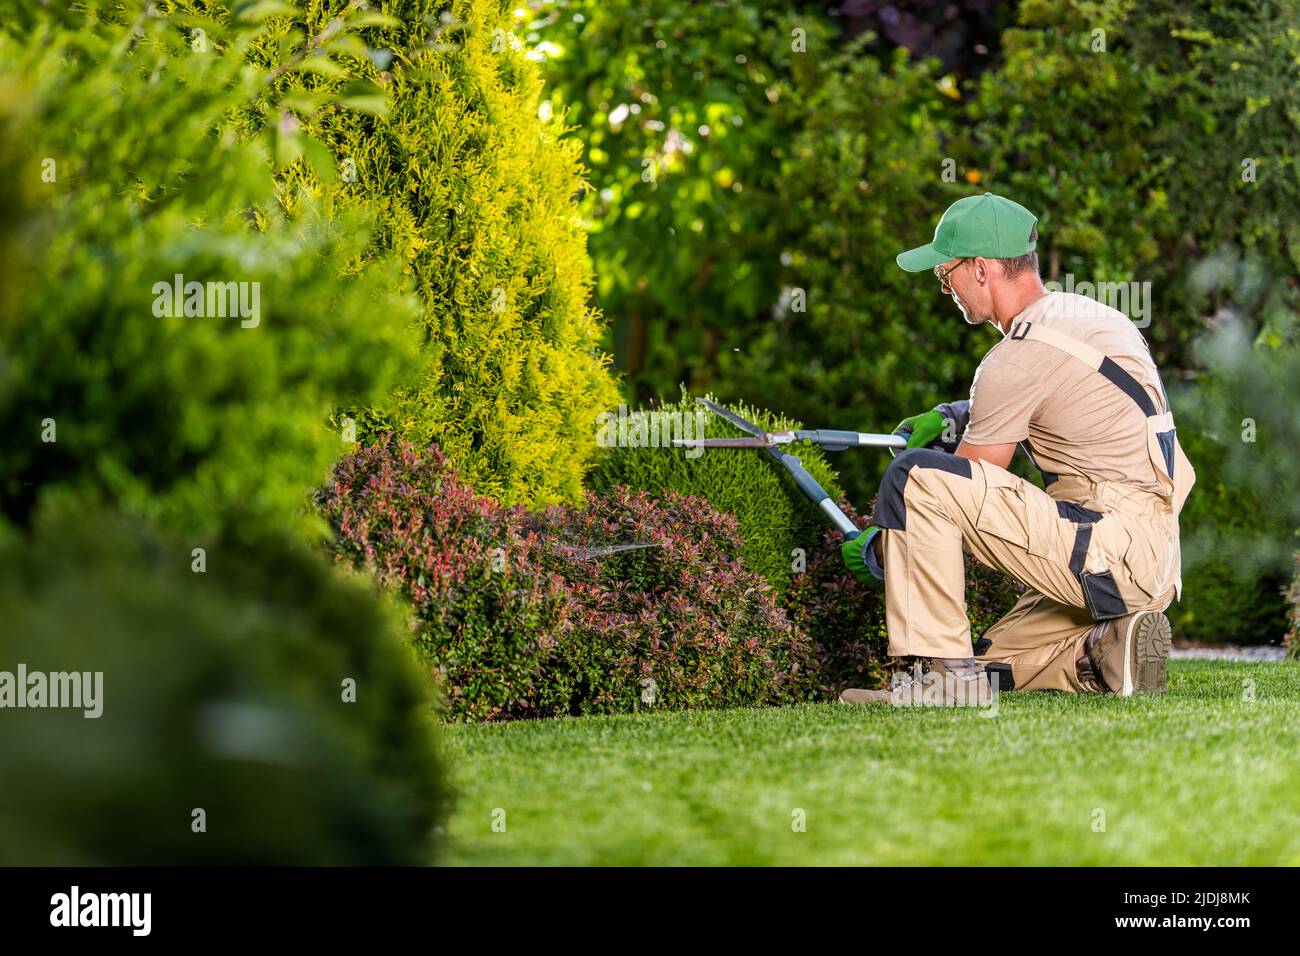 Garden Pruning Works to Maintain the Appearance of Shrubs, Bushes, Trees and Other Plants. Professional Landscaper Cutting the Overgrown Sprigs and Le Stock Photo